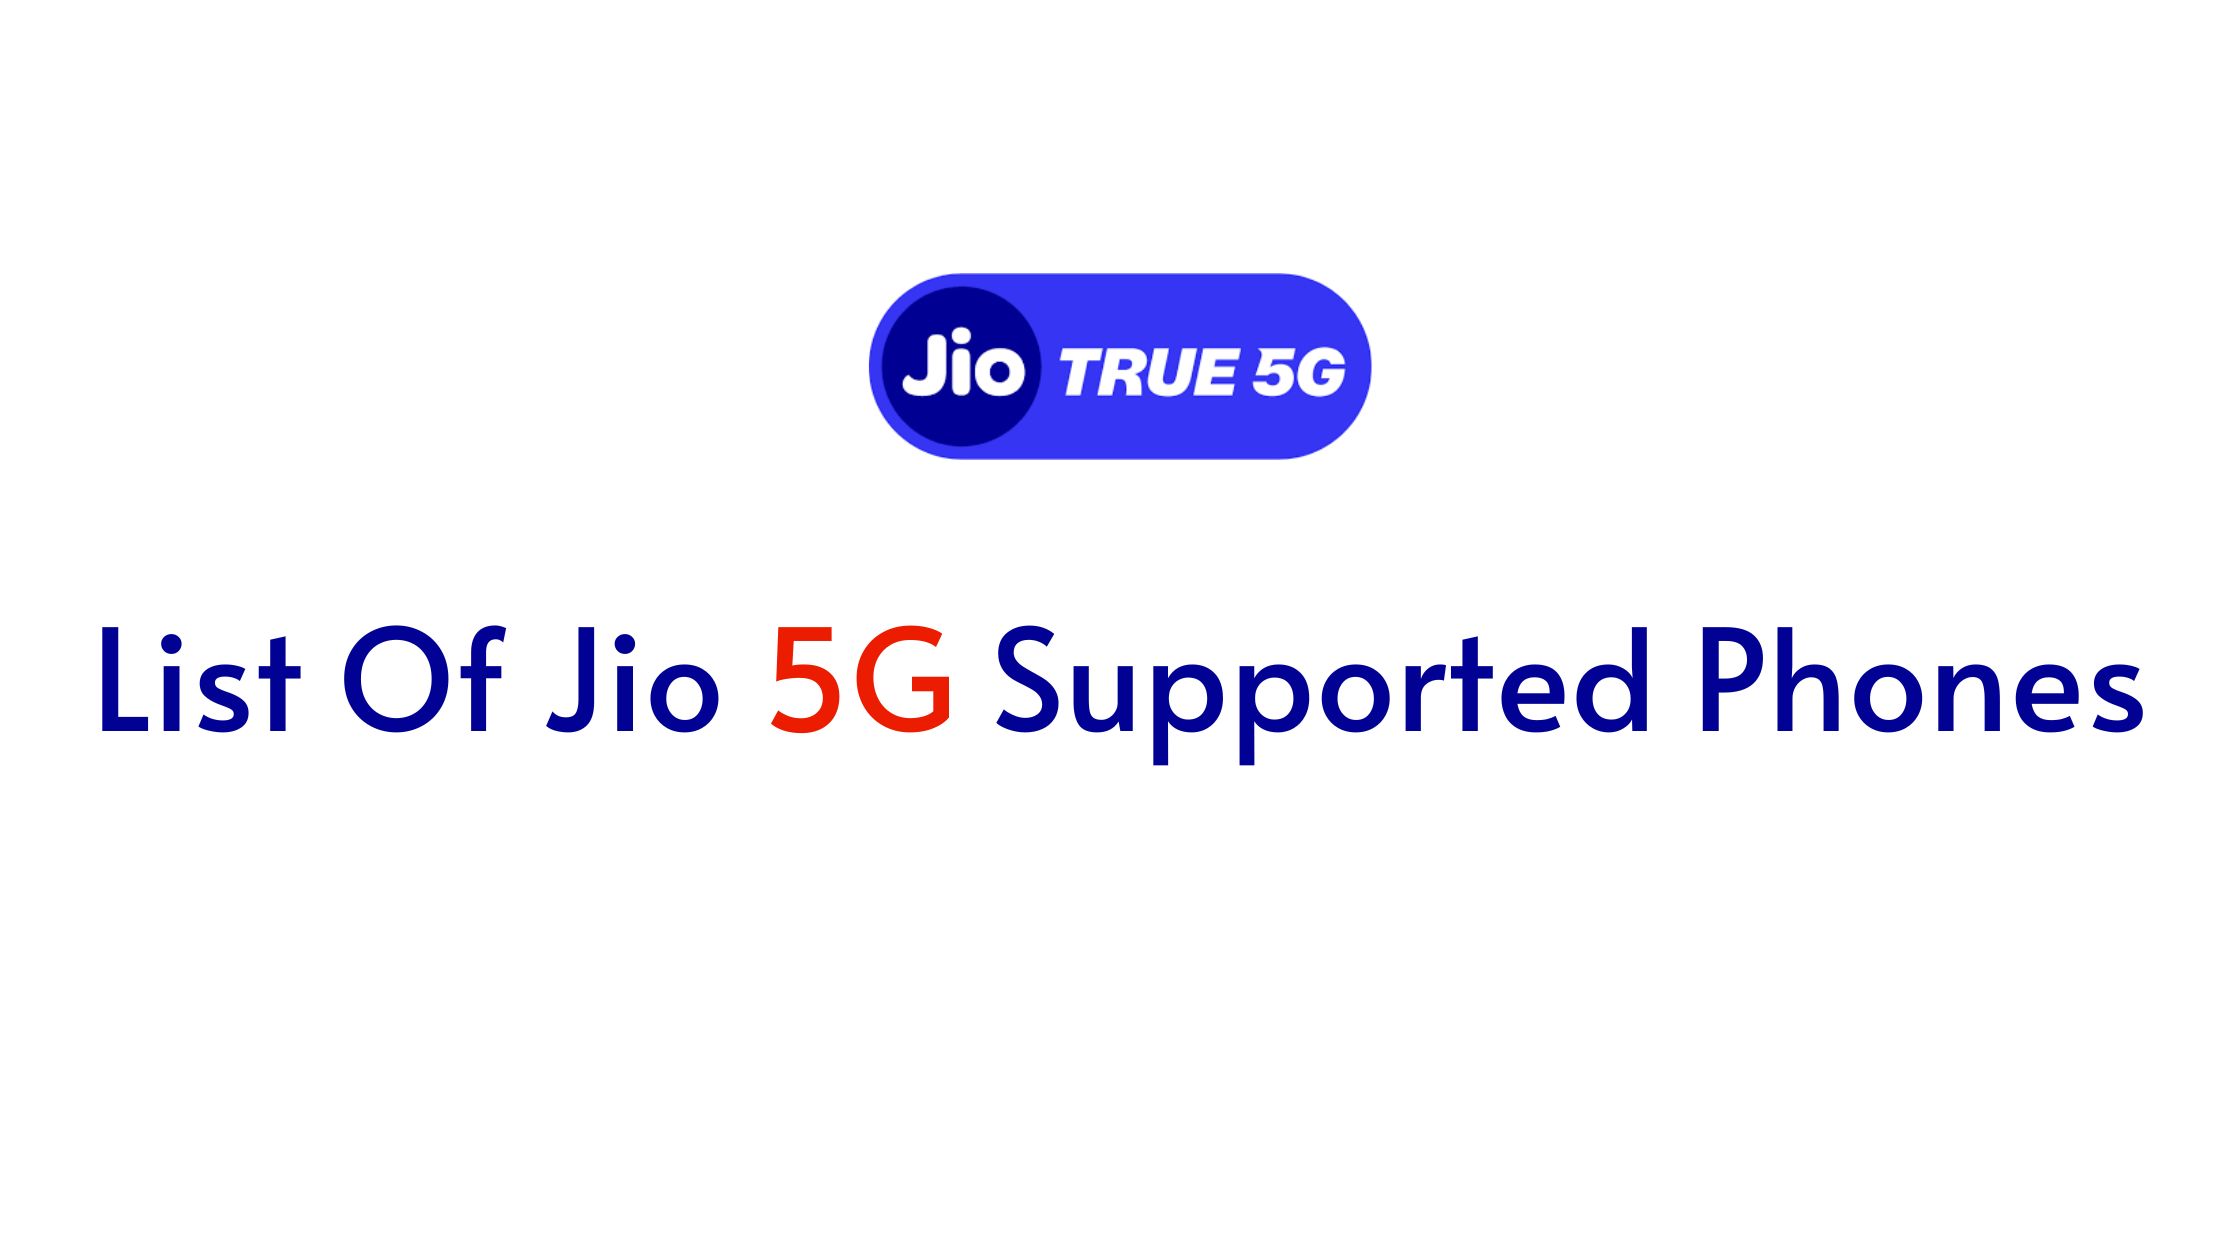 List Of Jio 5G Supported Phones